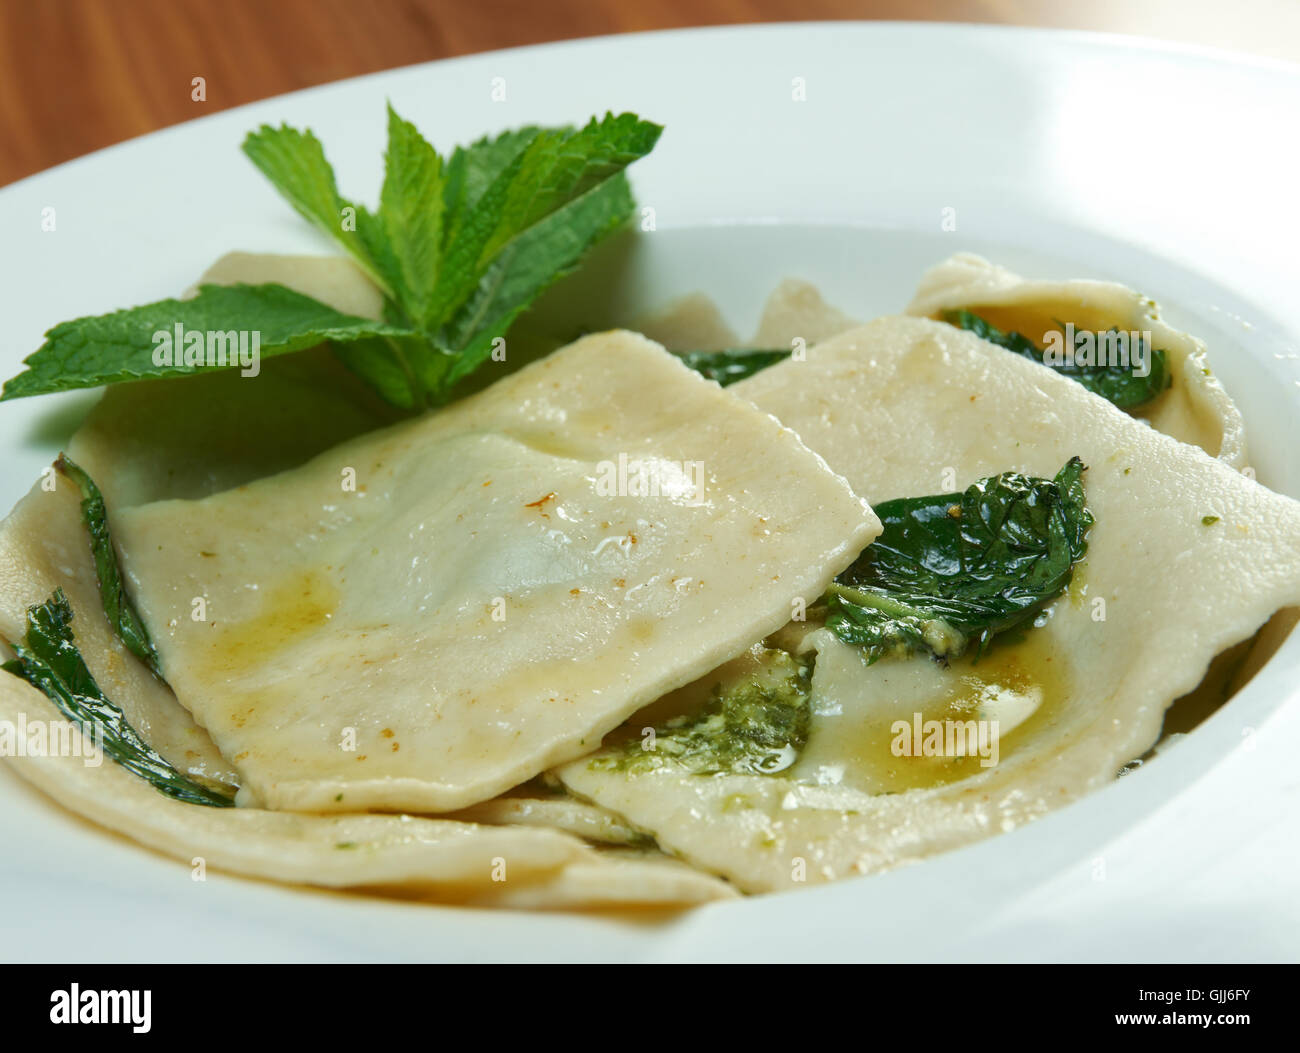 Italian ravioli with spinach and cheese Stock Photo